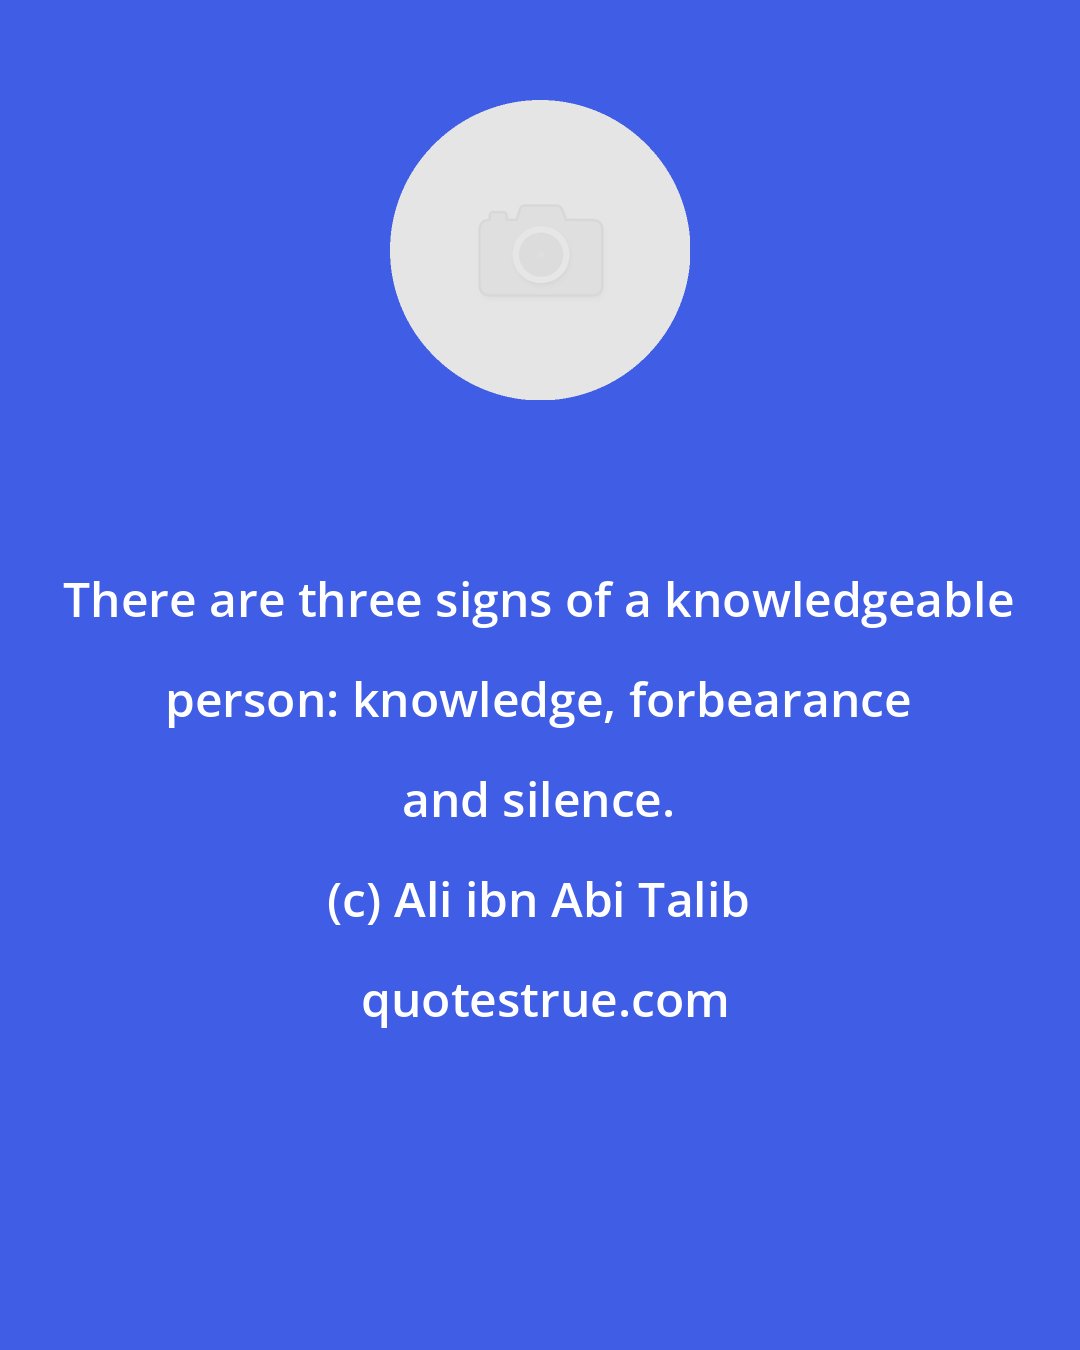 Ali ibn Abi Talib: There are three signs of a knowledgeable person: knowledge, forbearance and silence.